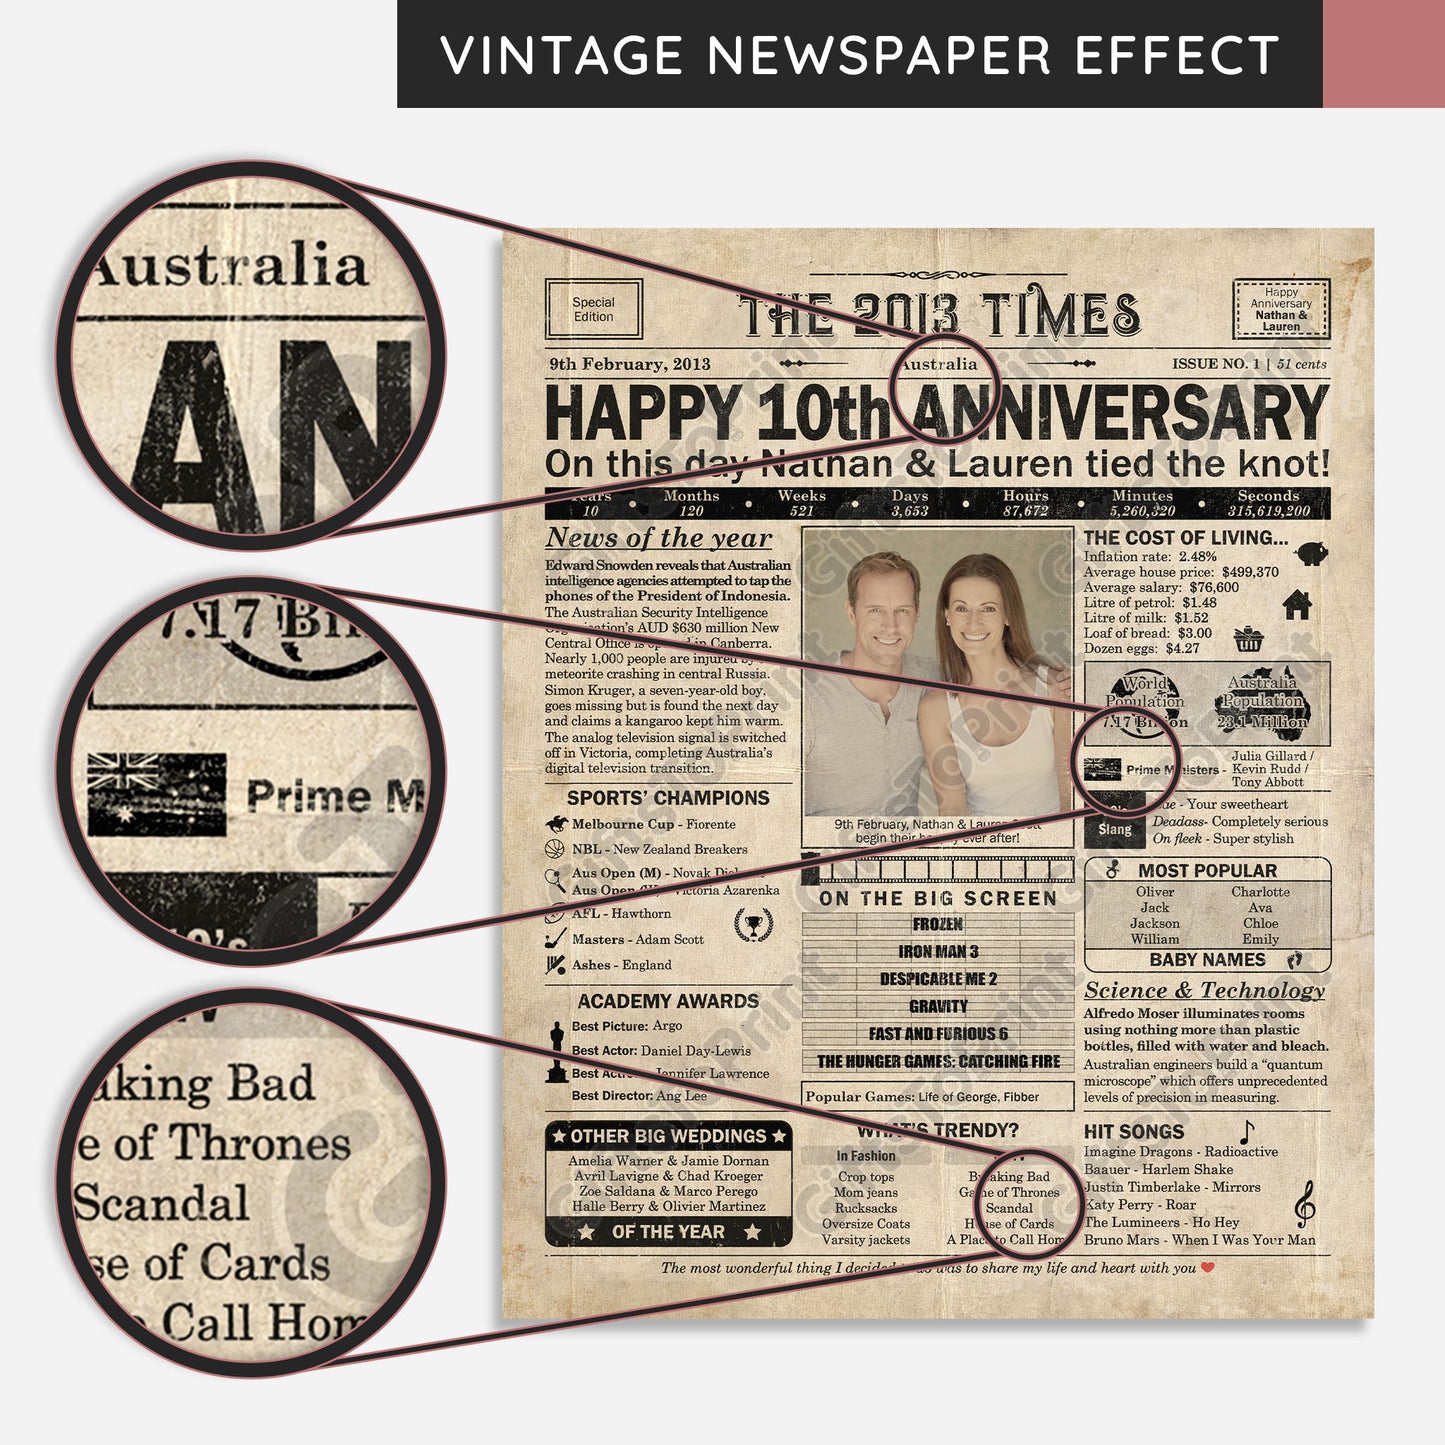 Personalised 10th Anniversary Gift: A Printable AUSTRALIAN Newspaper Poster of 2013